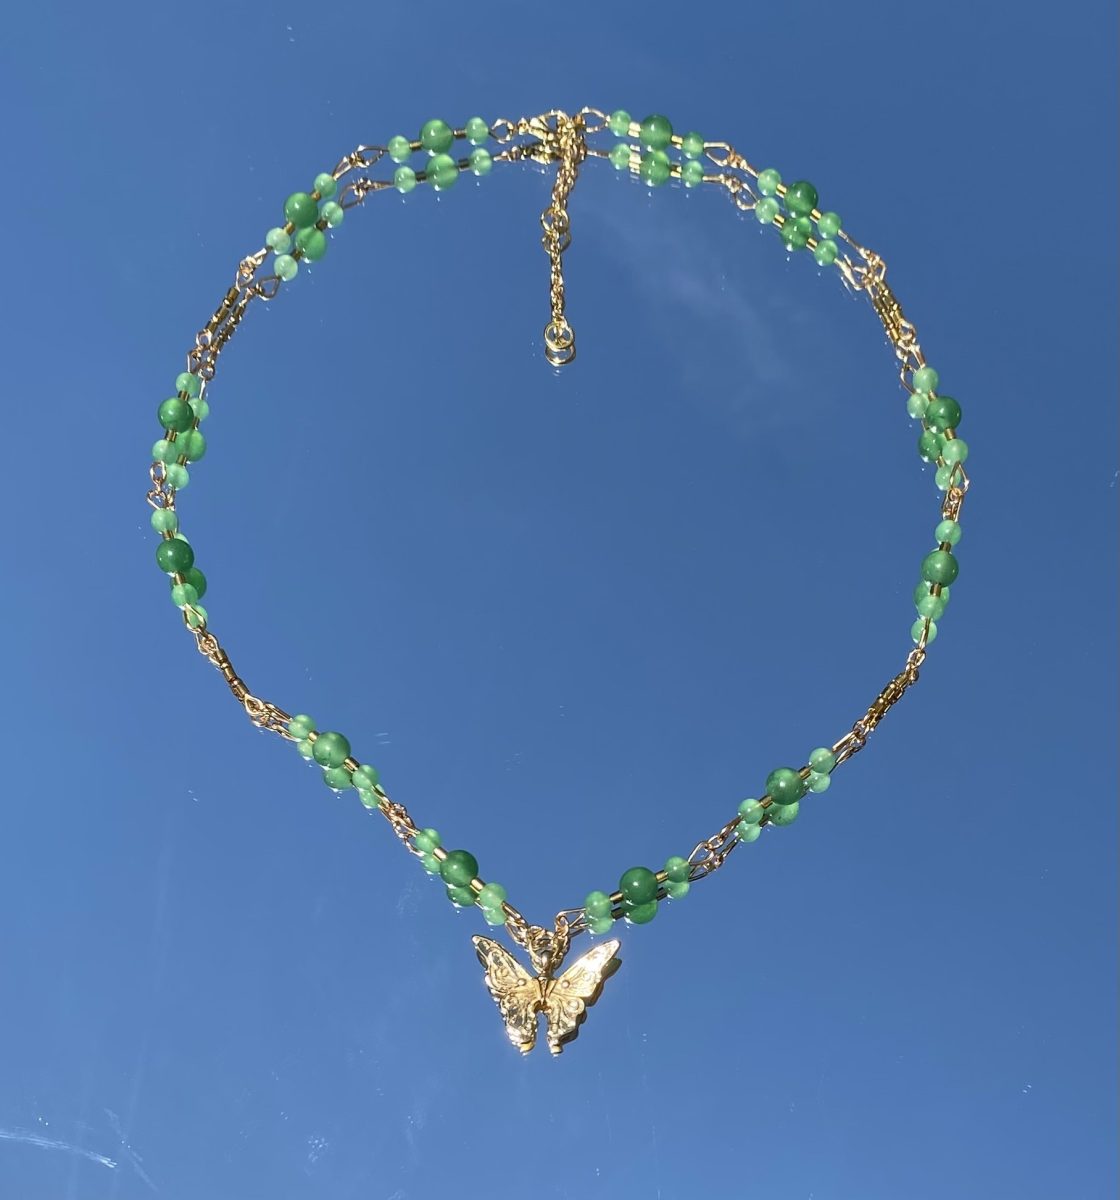 A necklace created by Madallie that you can buy off her website.